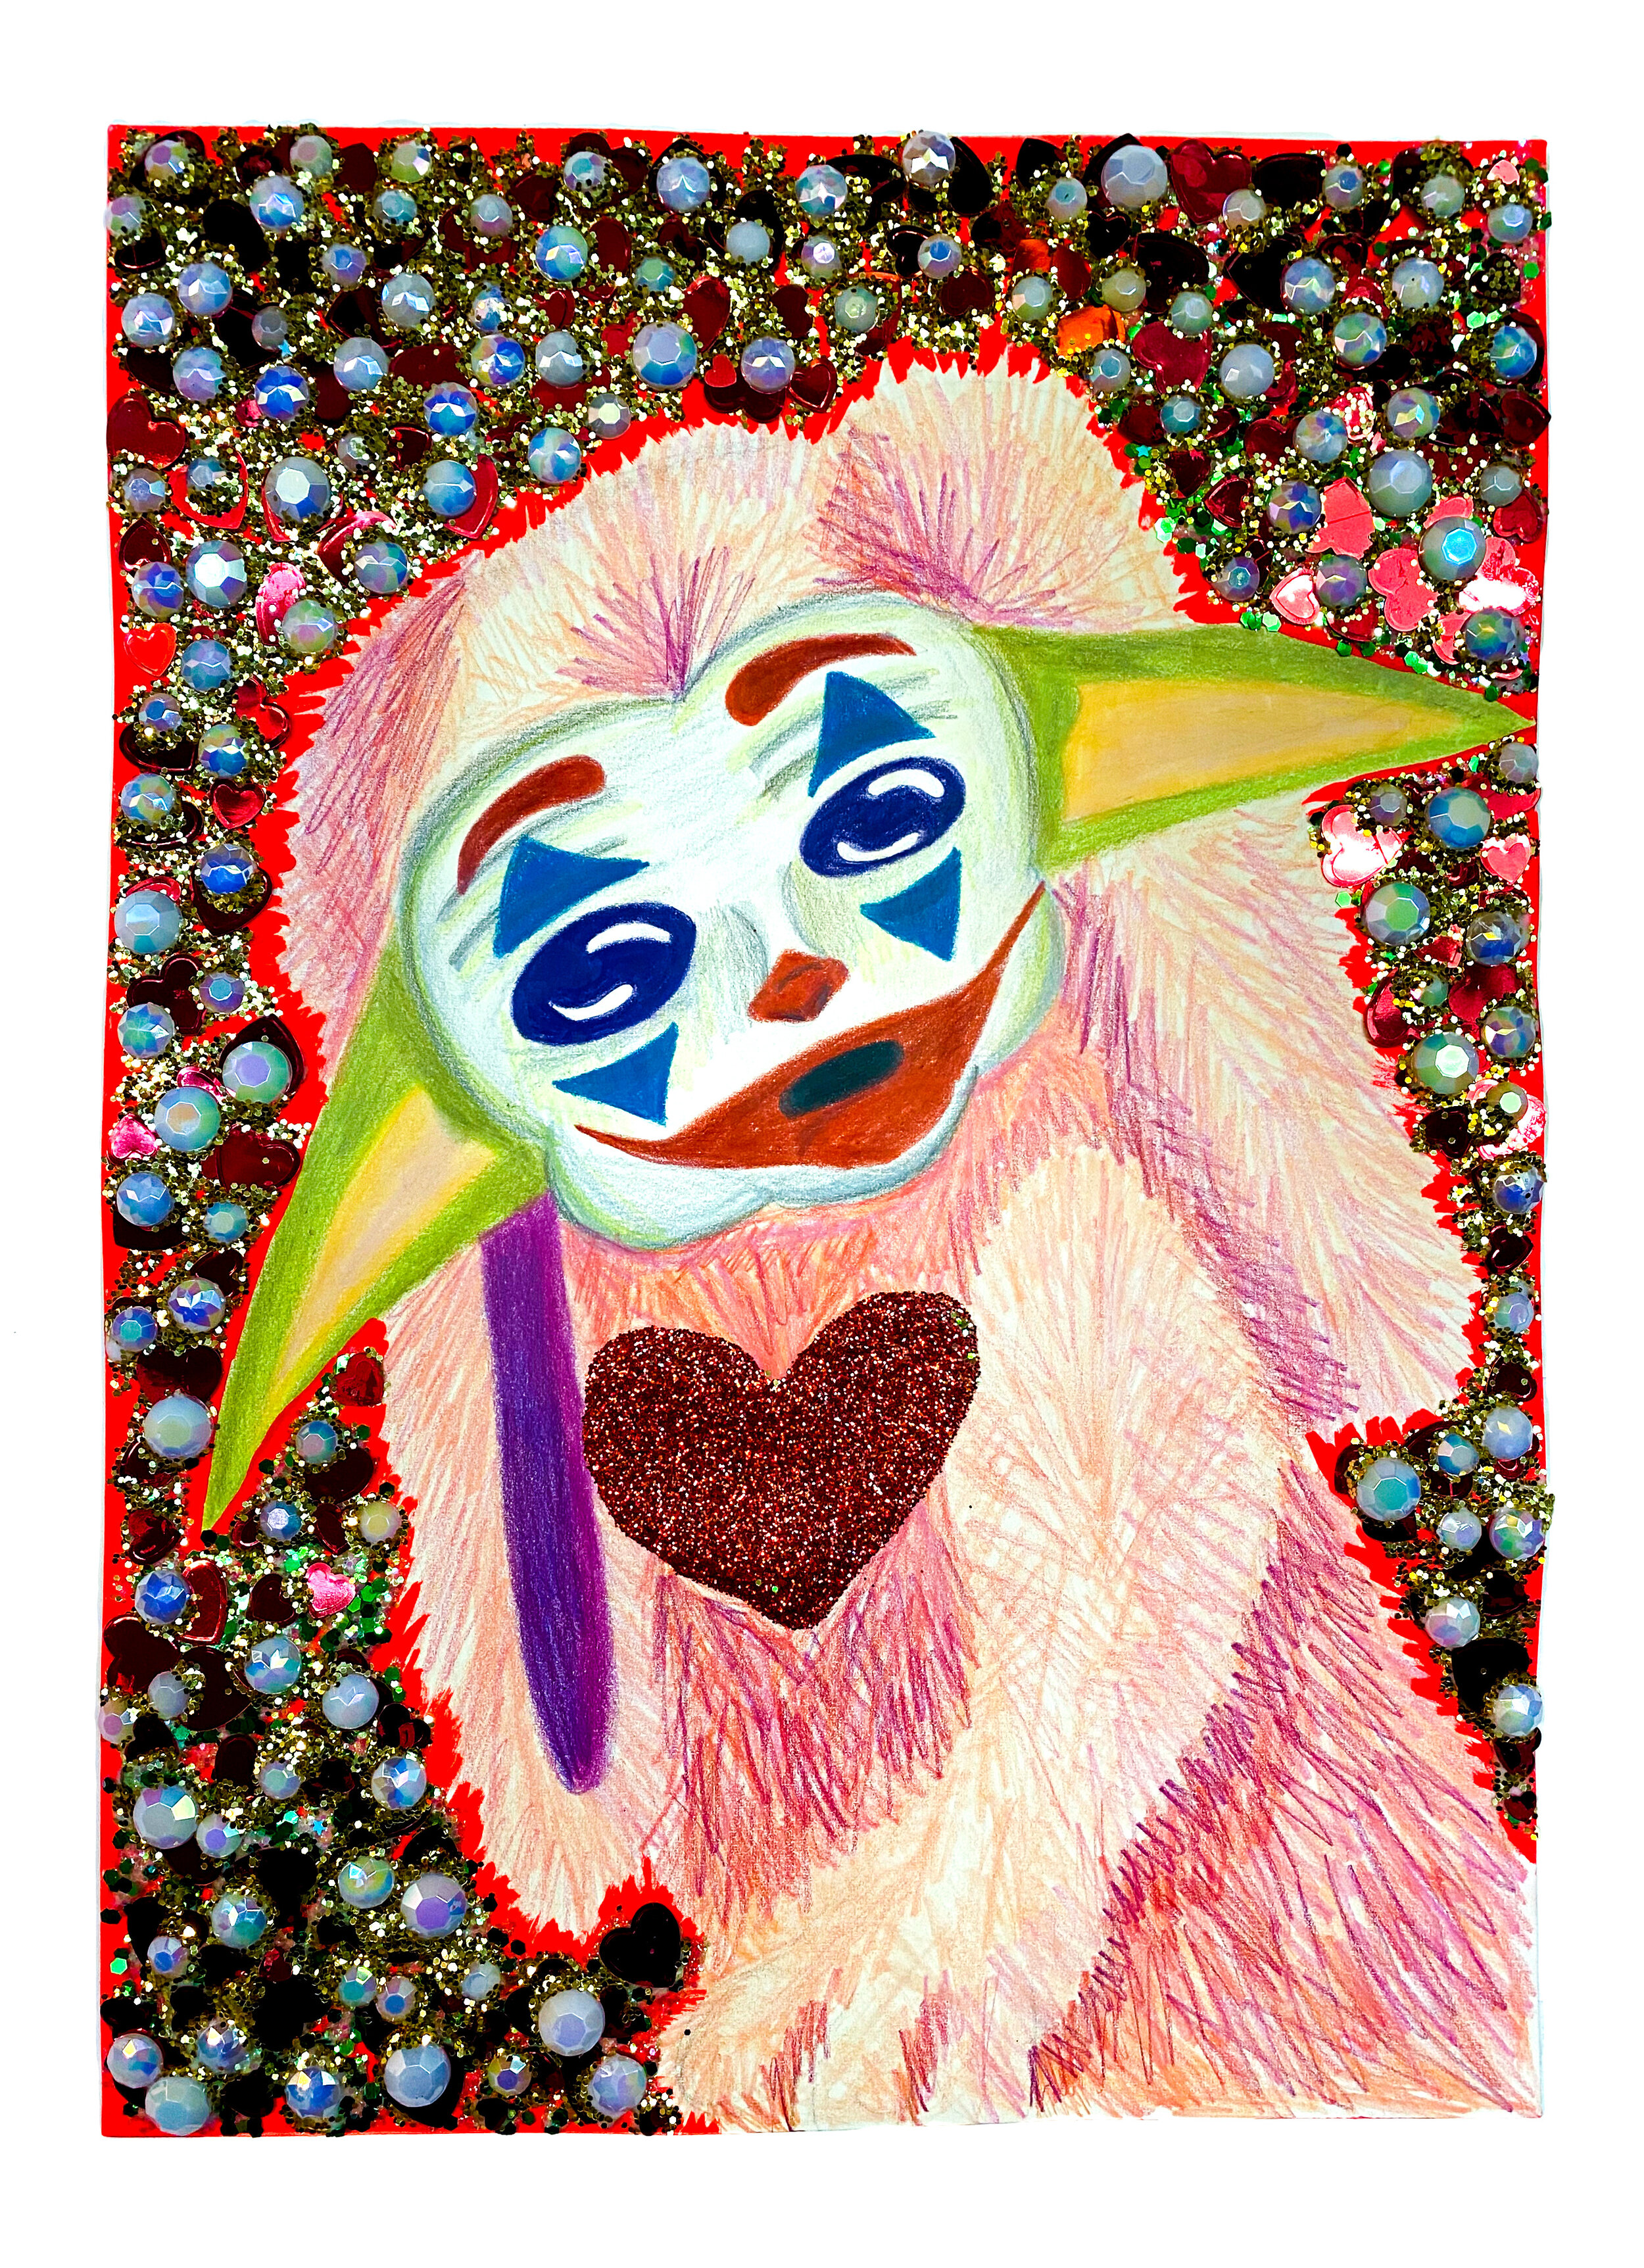   Baby Grogu with Joker Face Paint Dressed as an Anne Geddes Bunny,  2021  14 x 10 inches (35.56 x 25.4 cm.)  Colored pencil, acrylic paint, plastic gems, Elmer's glue, Modge podge, heart shaped sequins, and glitter on paper 